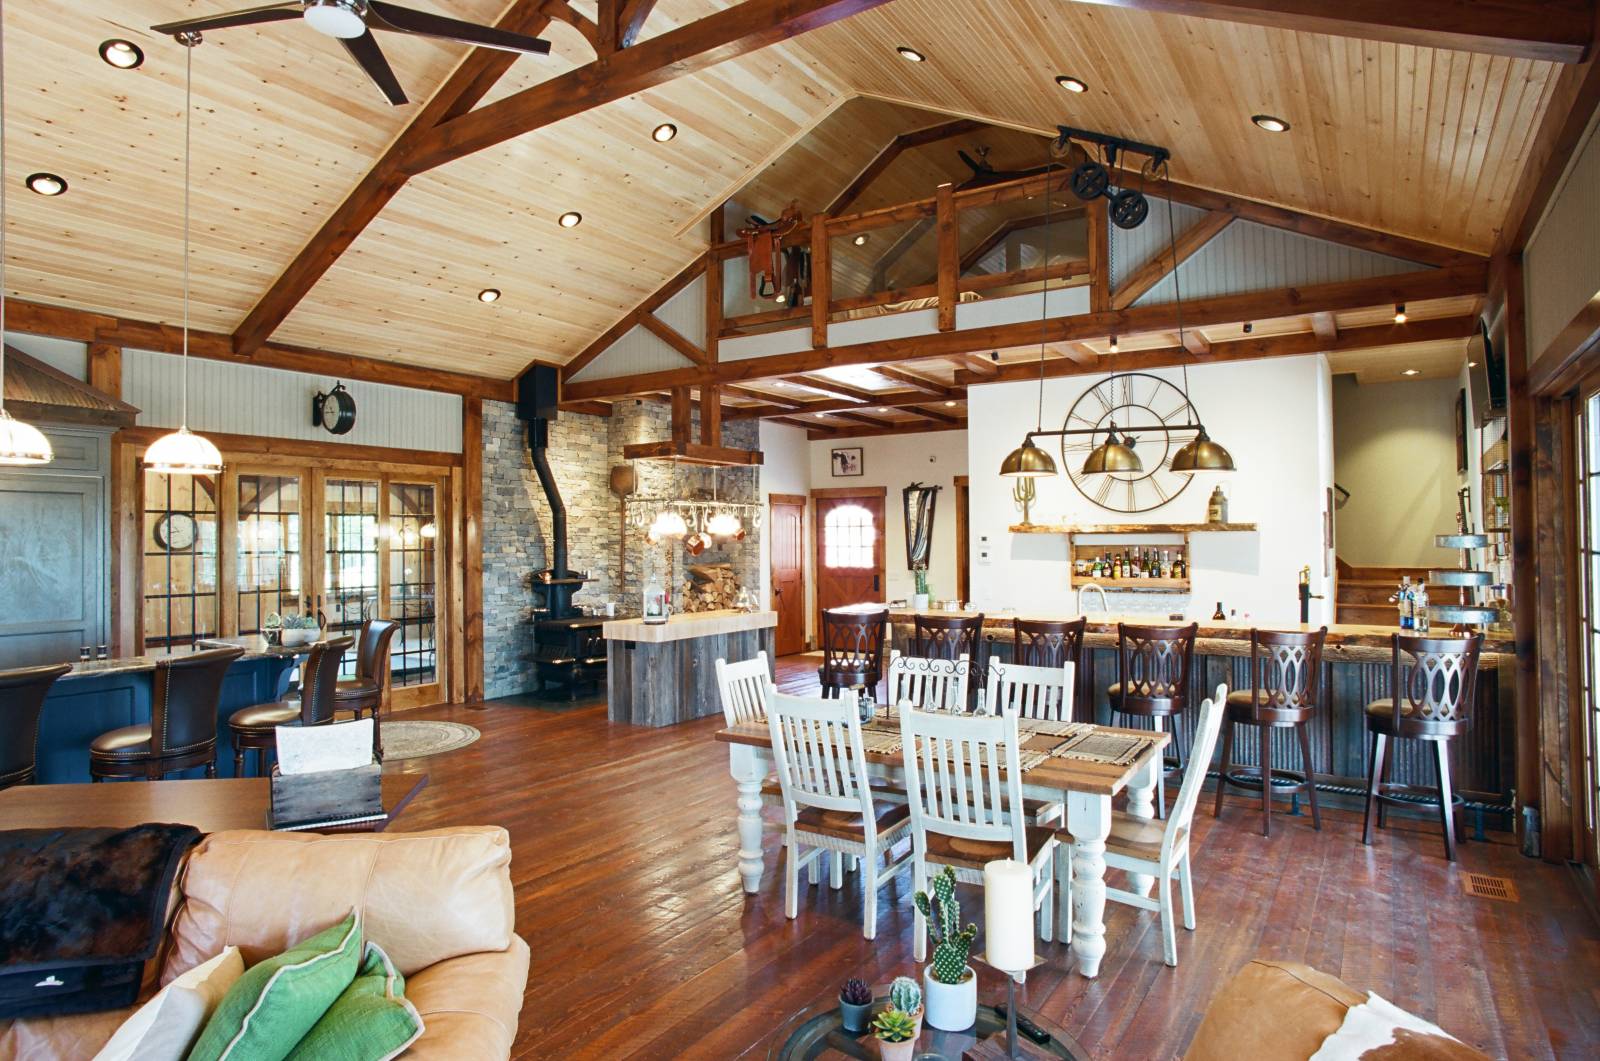 2500 sq. ft. Party Barn with Timber Frame Accents